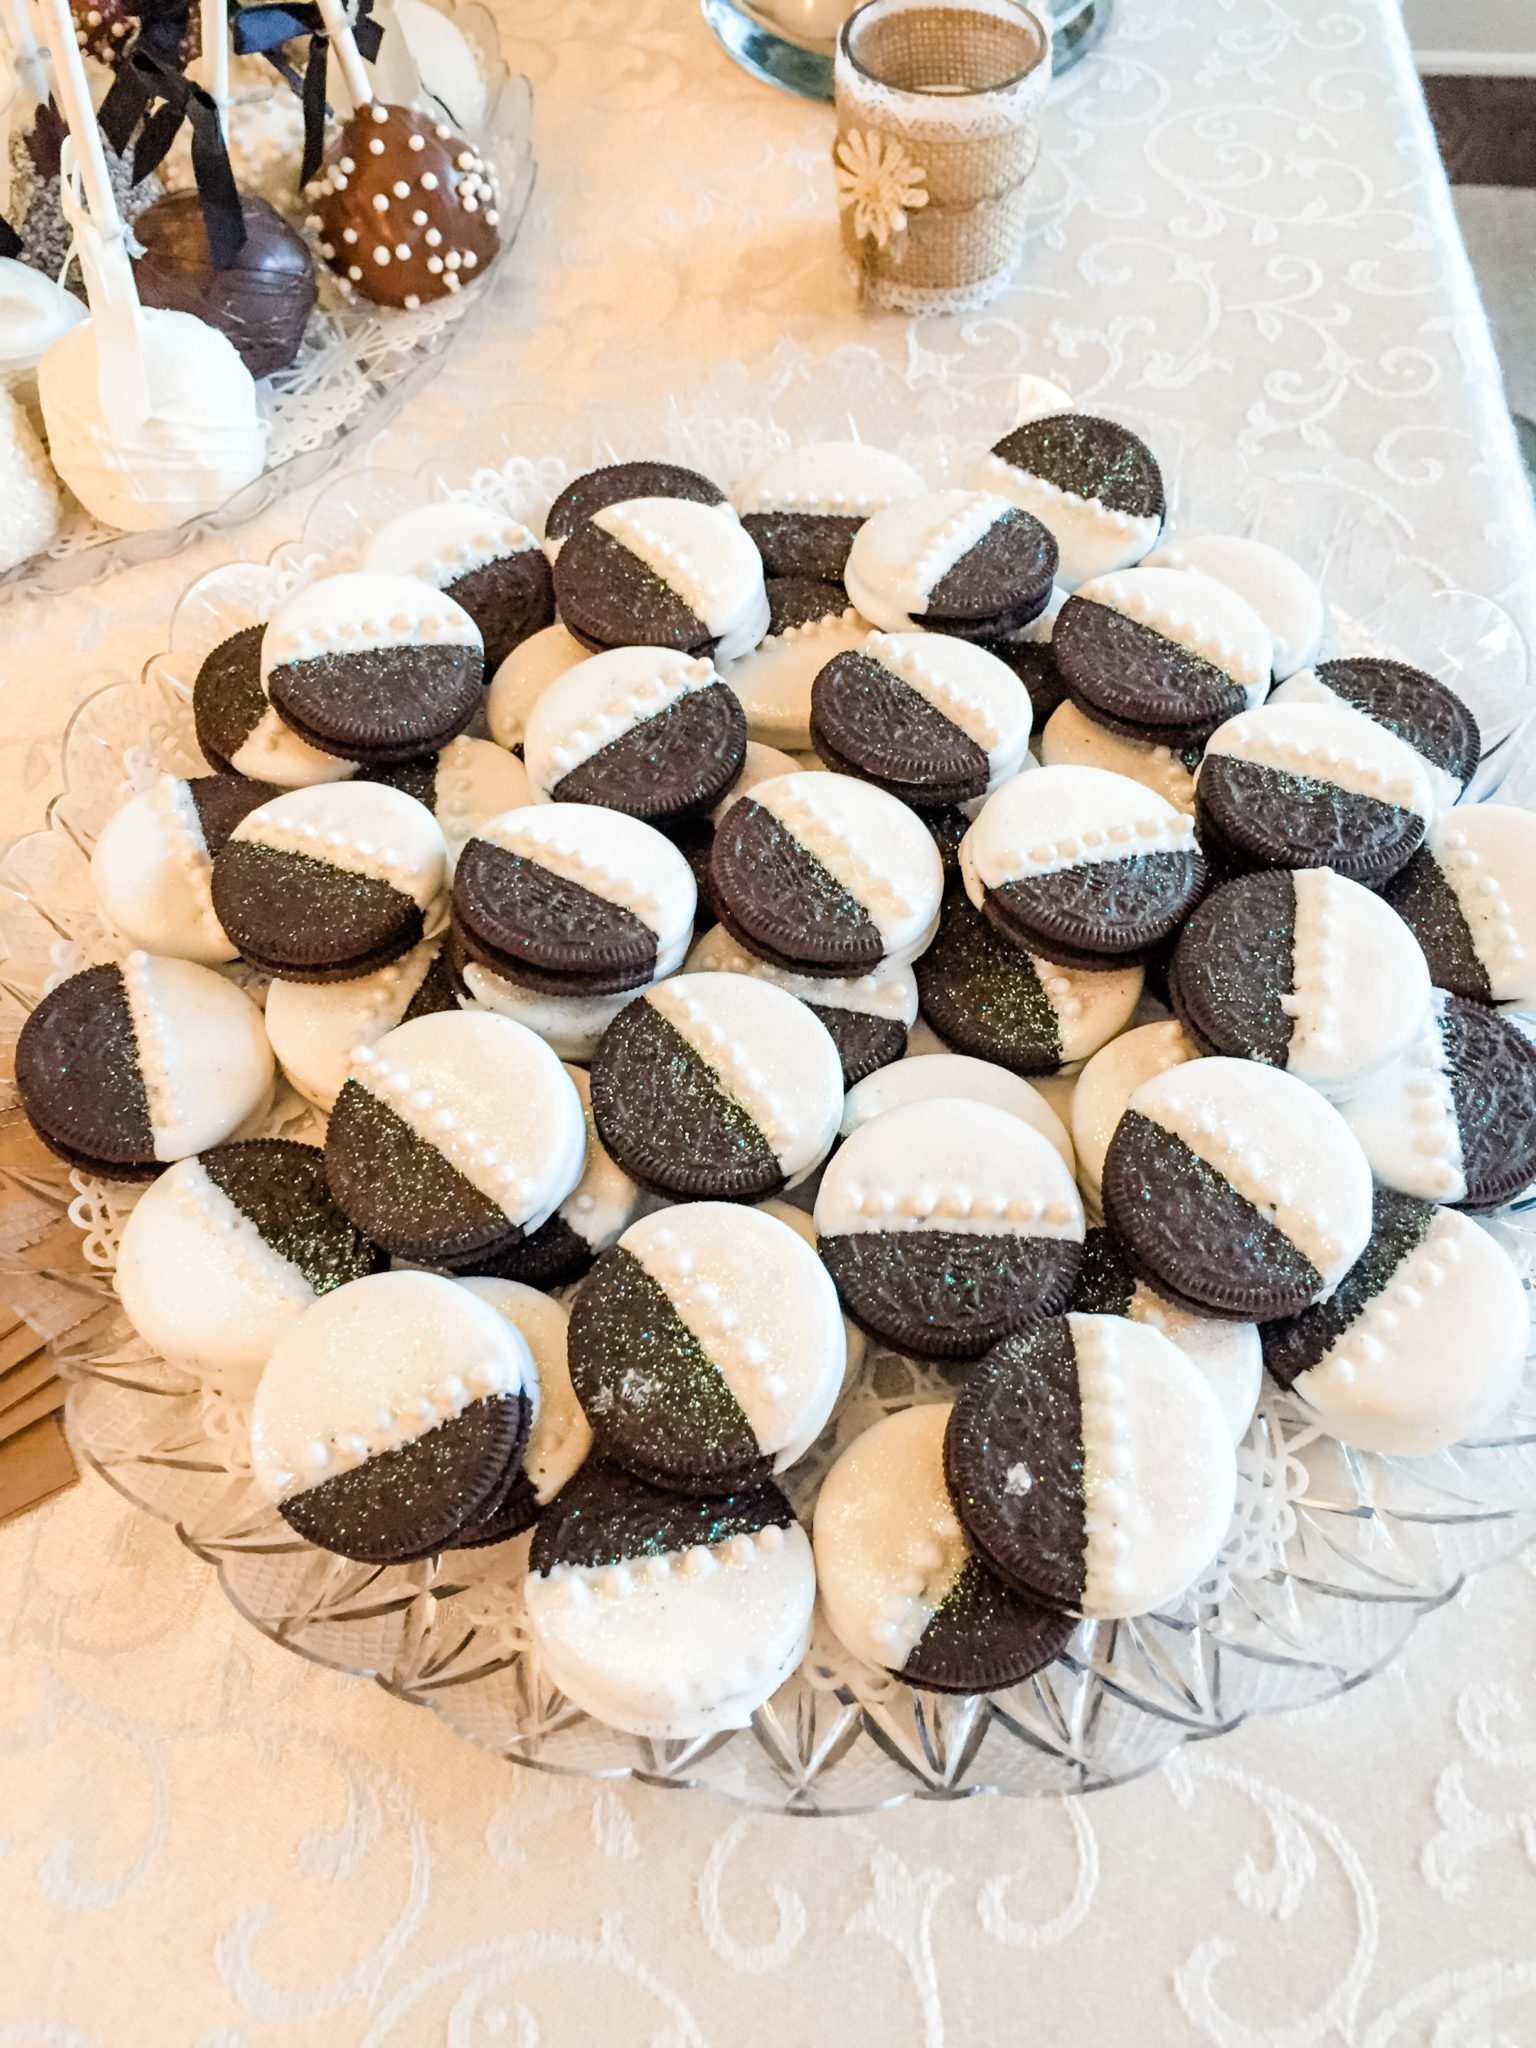 A platter of half dipped chocolate covered Oreos for a bridal shower.